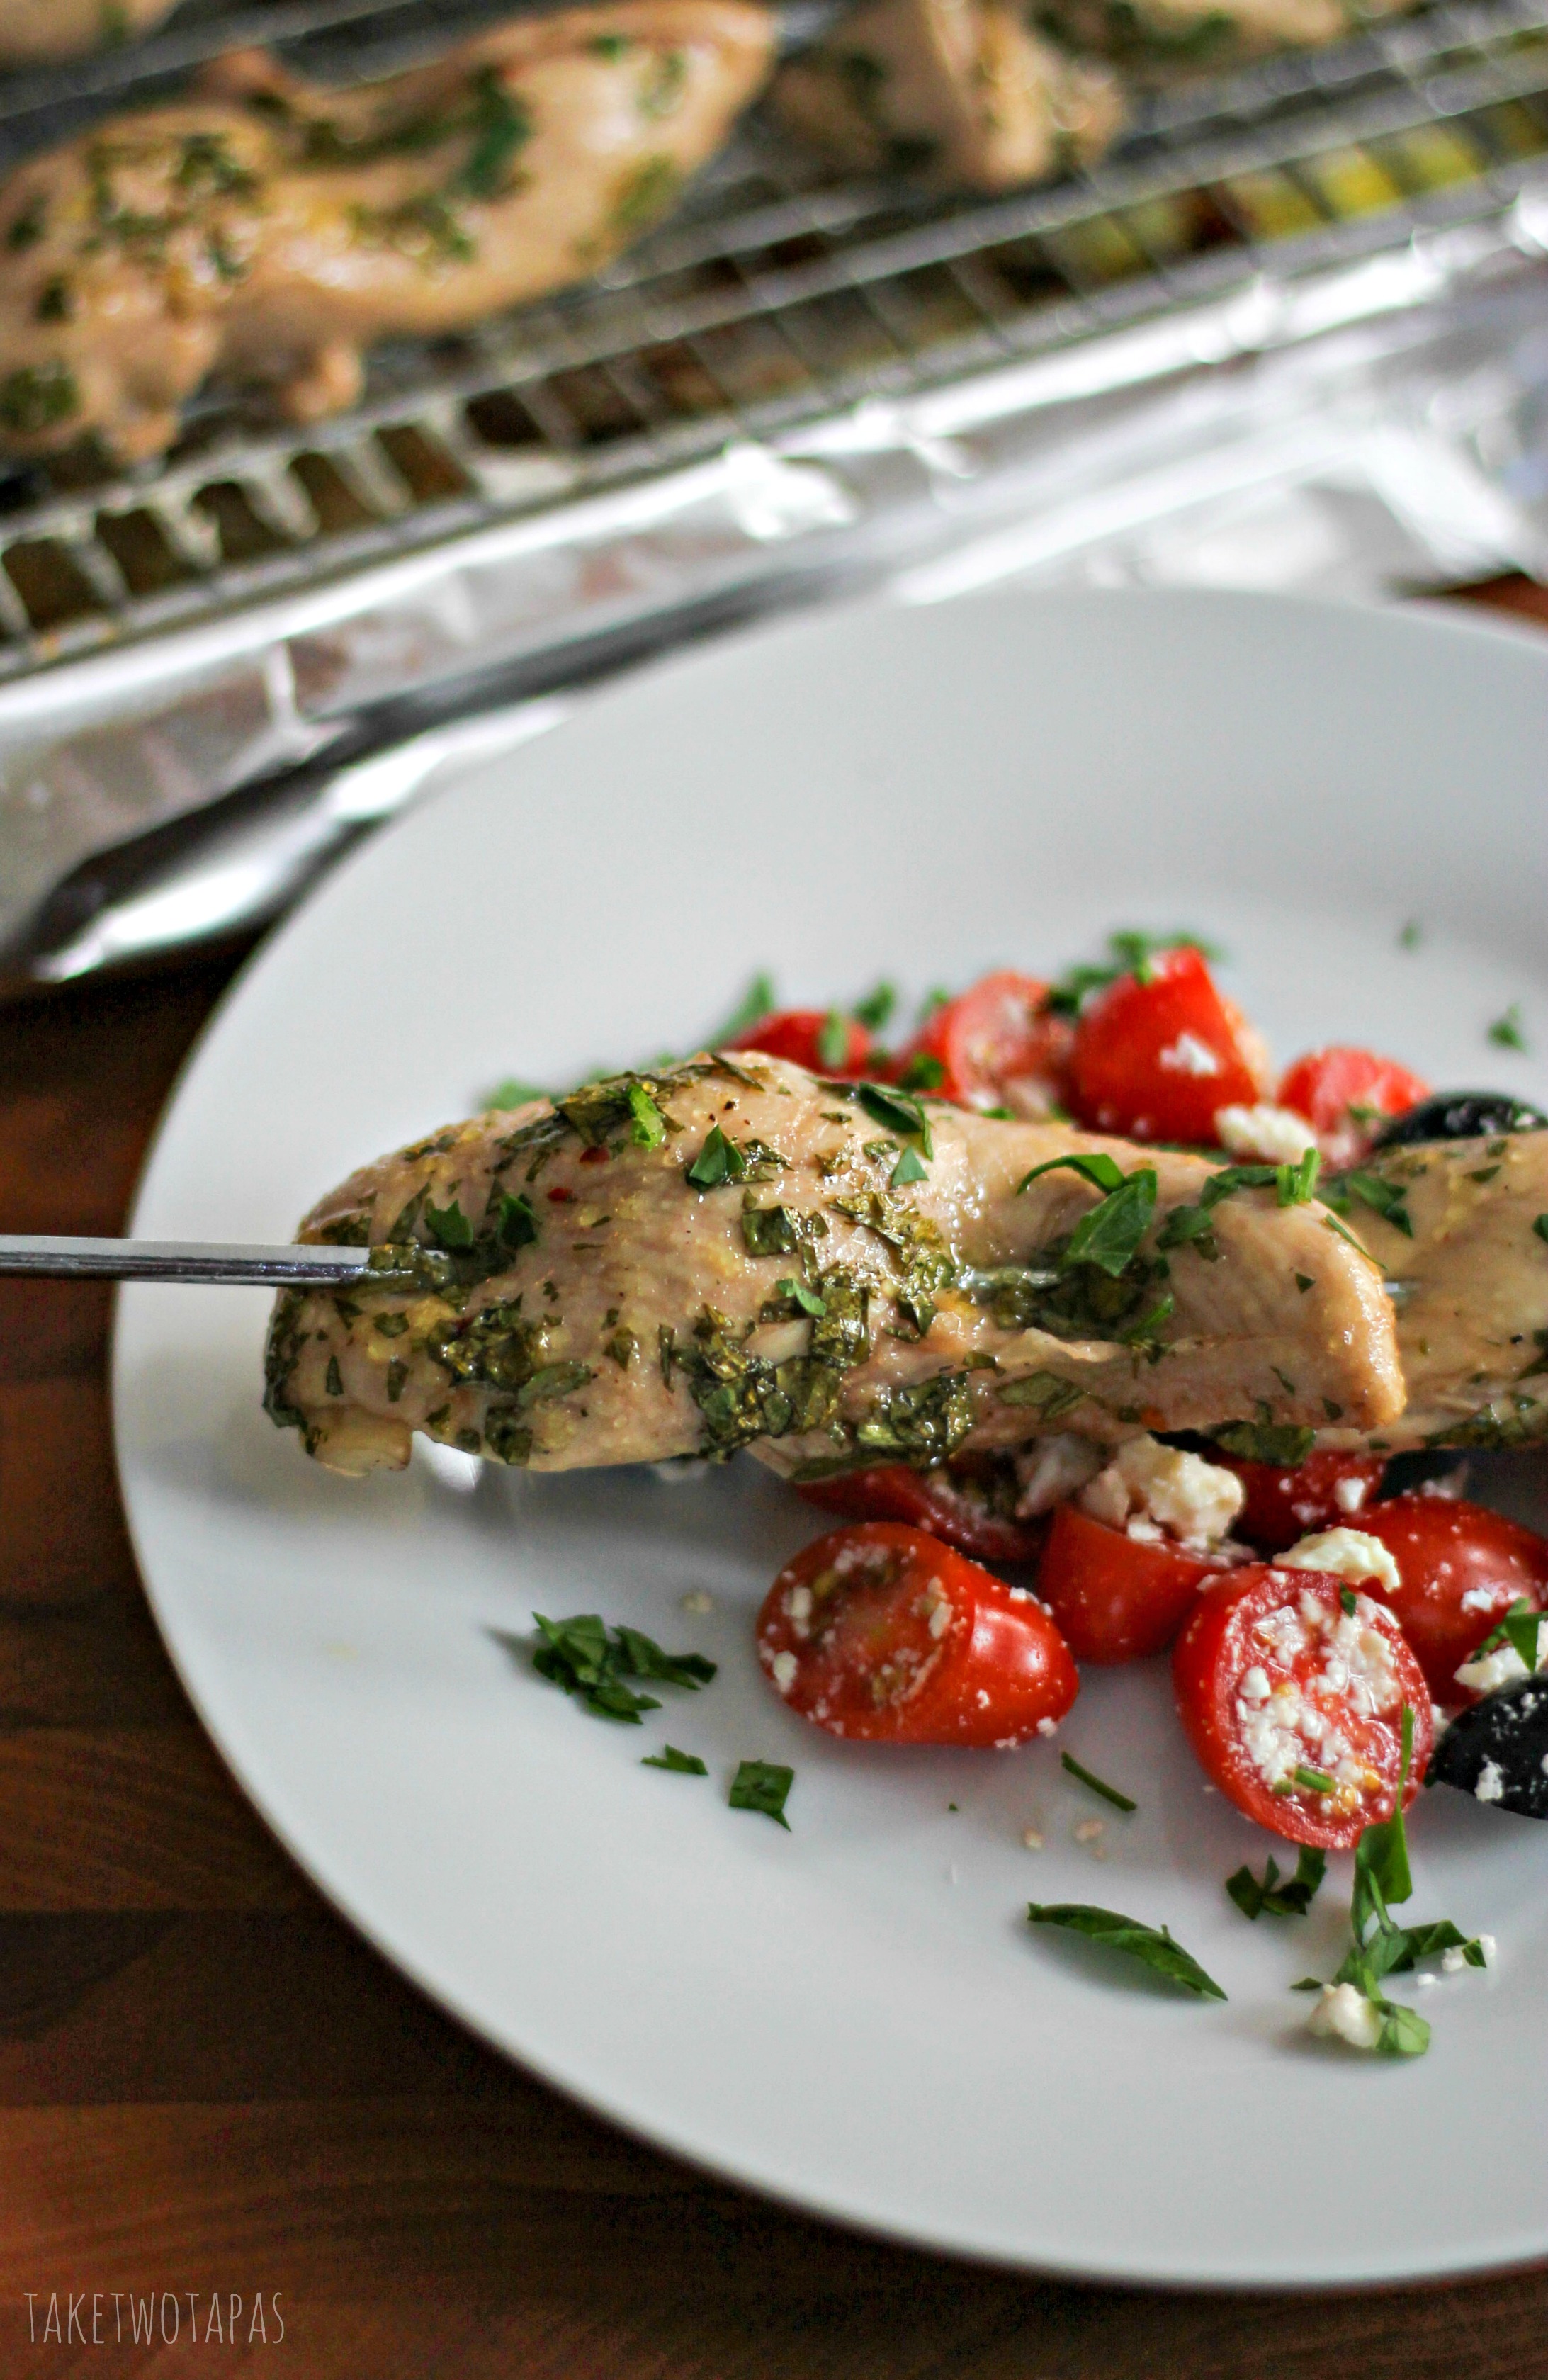 Juicy chicken marinated in a tangy, red wine vinaigrette, and served on a stick. Everything about that says fun. My kids love fun! Mediterranean Chicken Skewers Recipe | Take Two Tapas